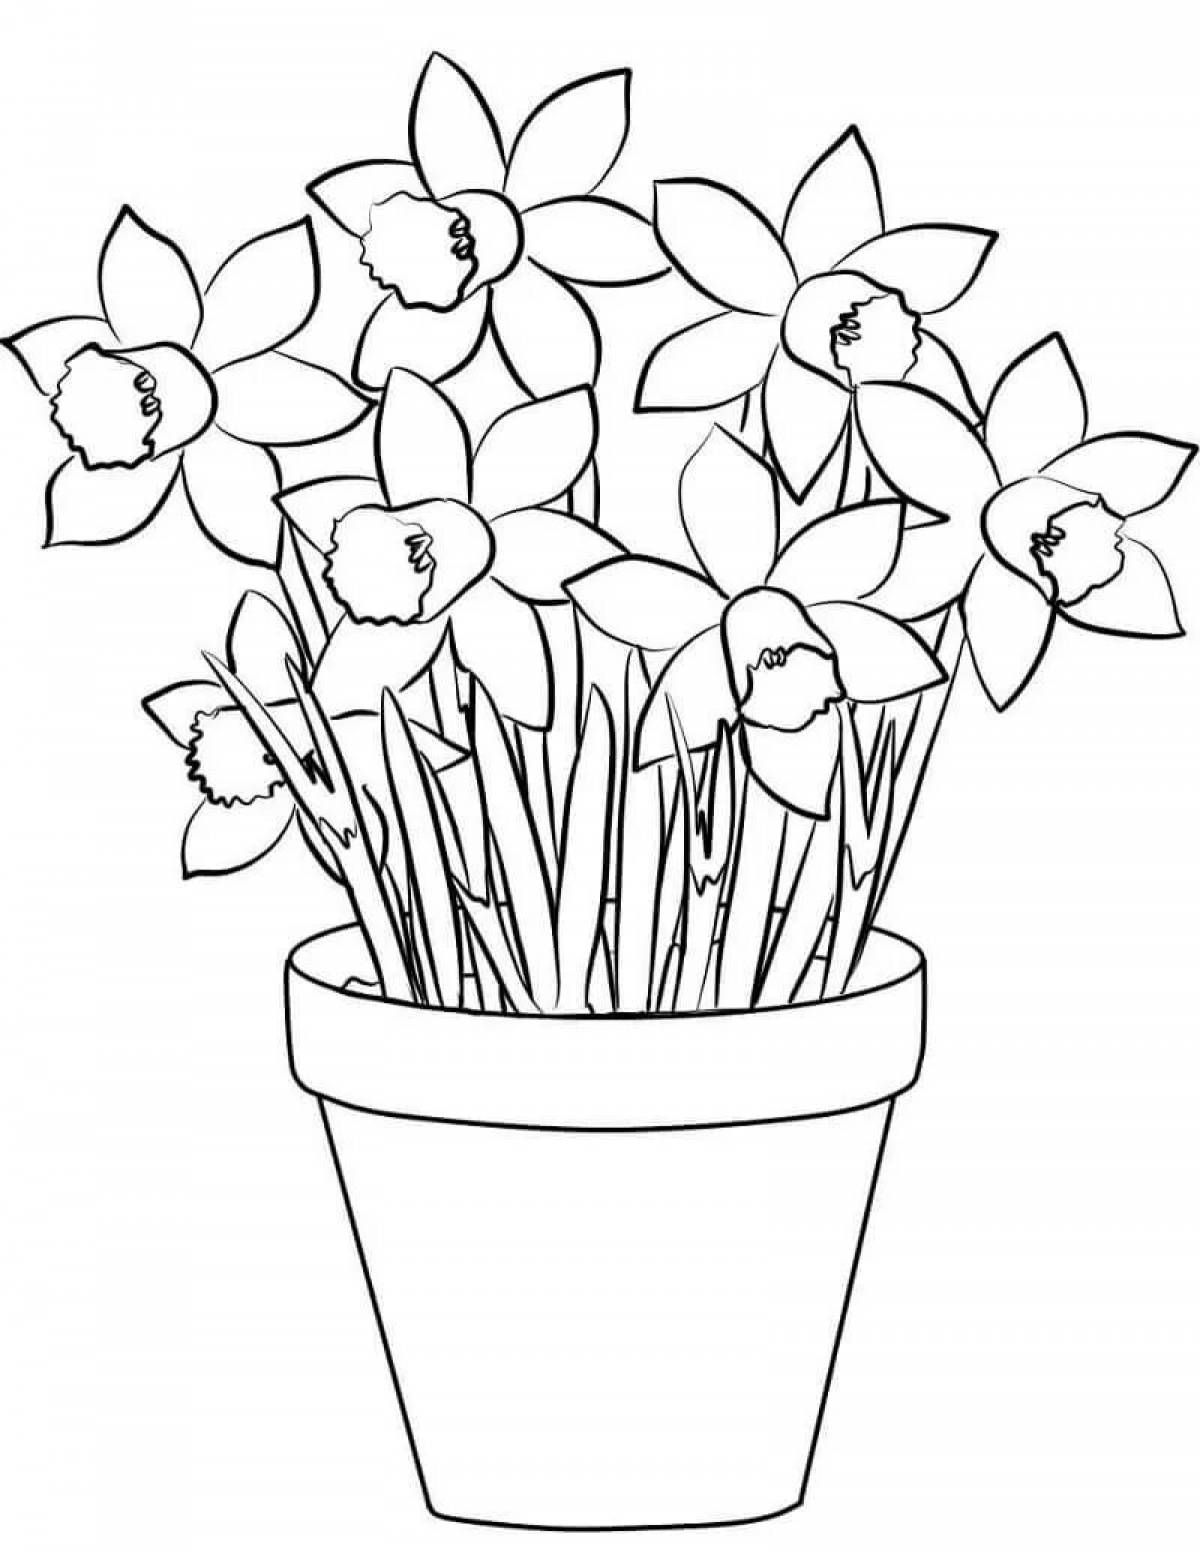 Coloring book enchanting narcissus flower